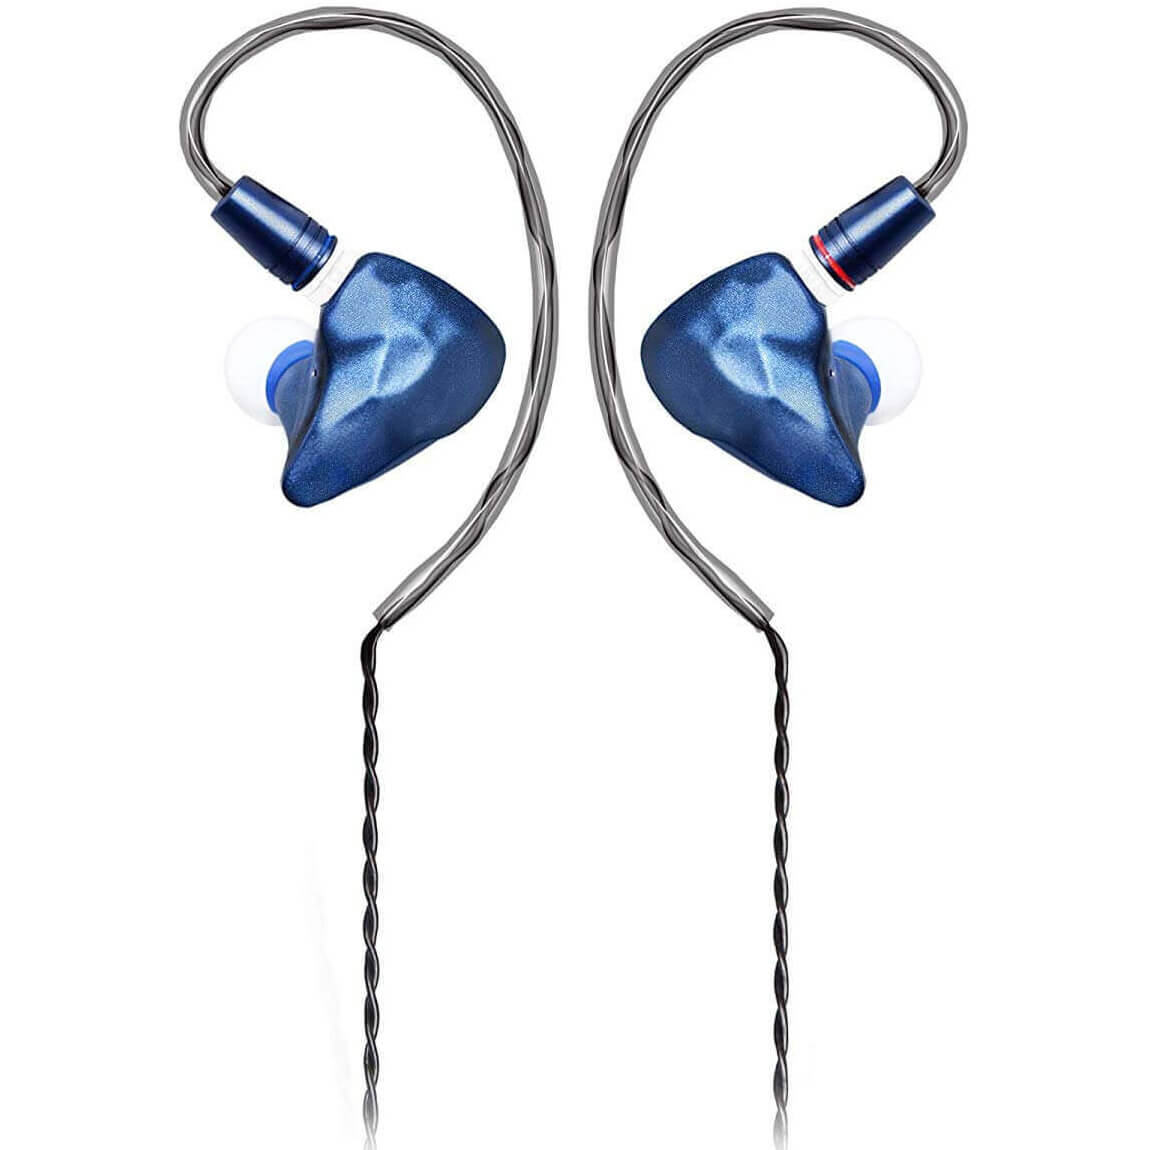 Buy Ikko OH1 Earphone at HiFiNage in India with warranty.